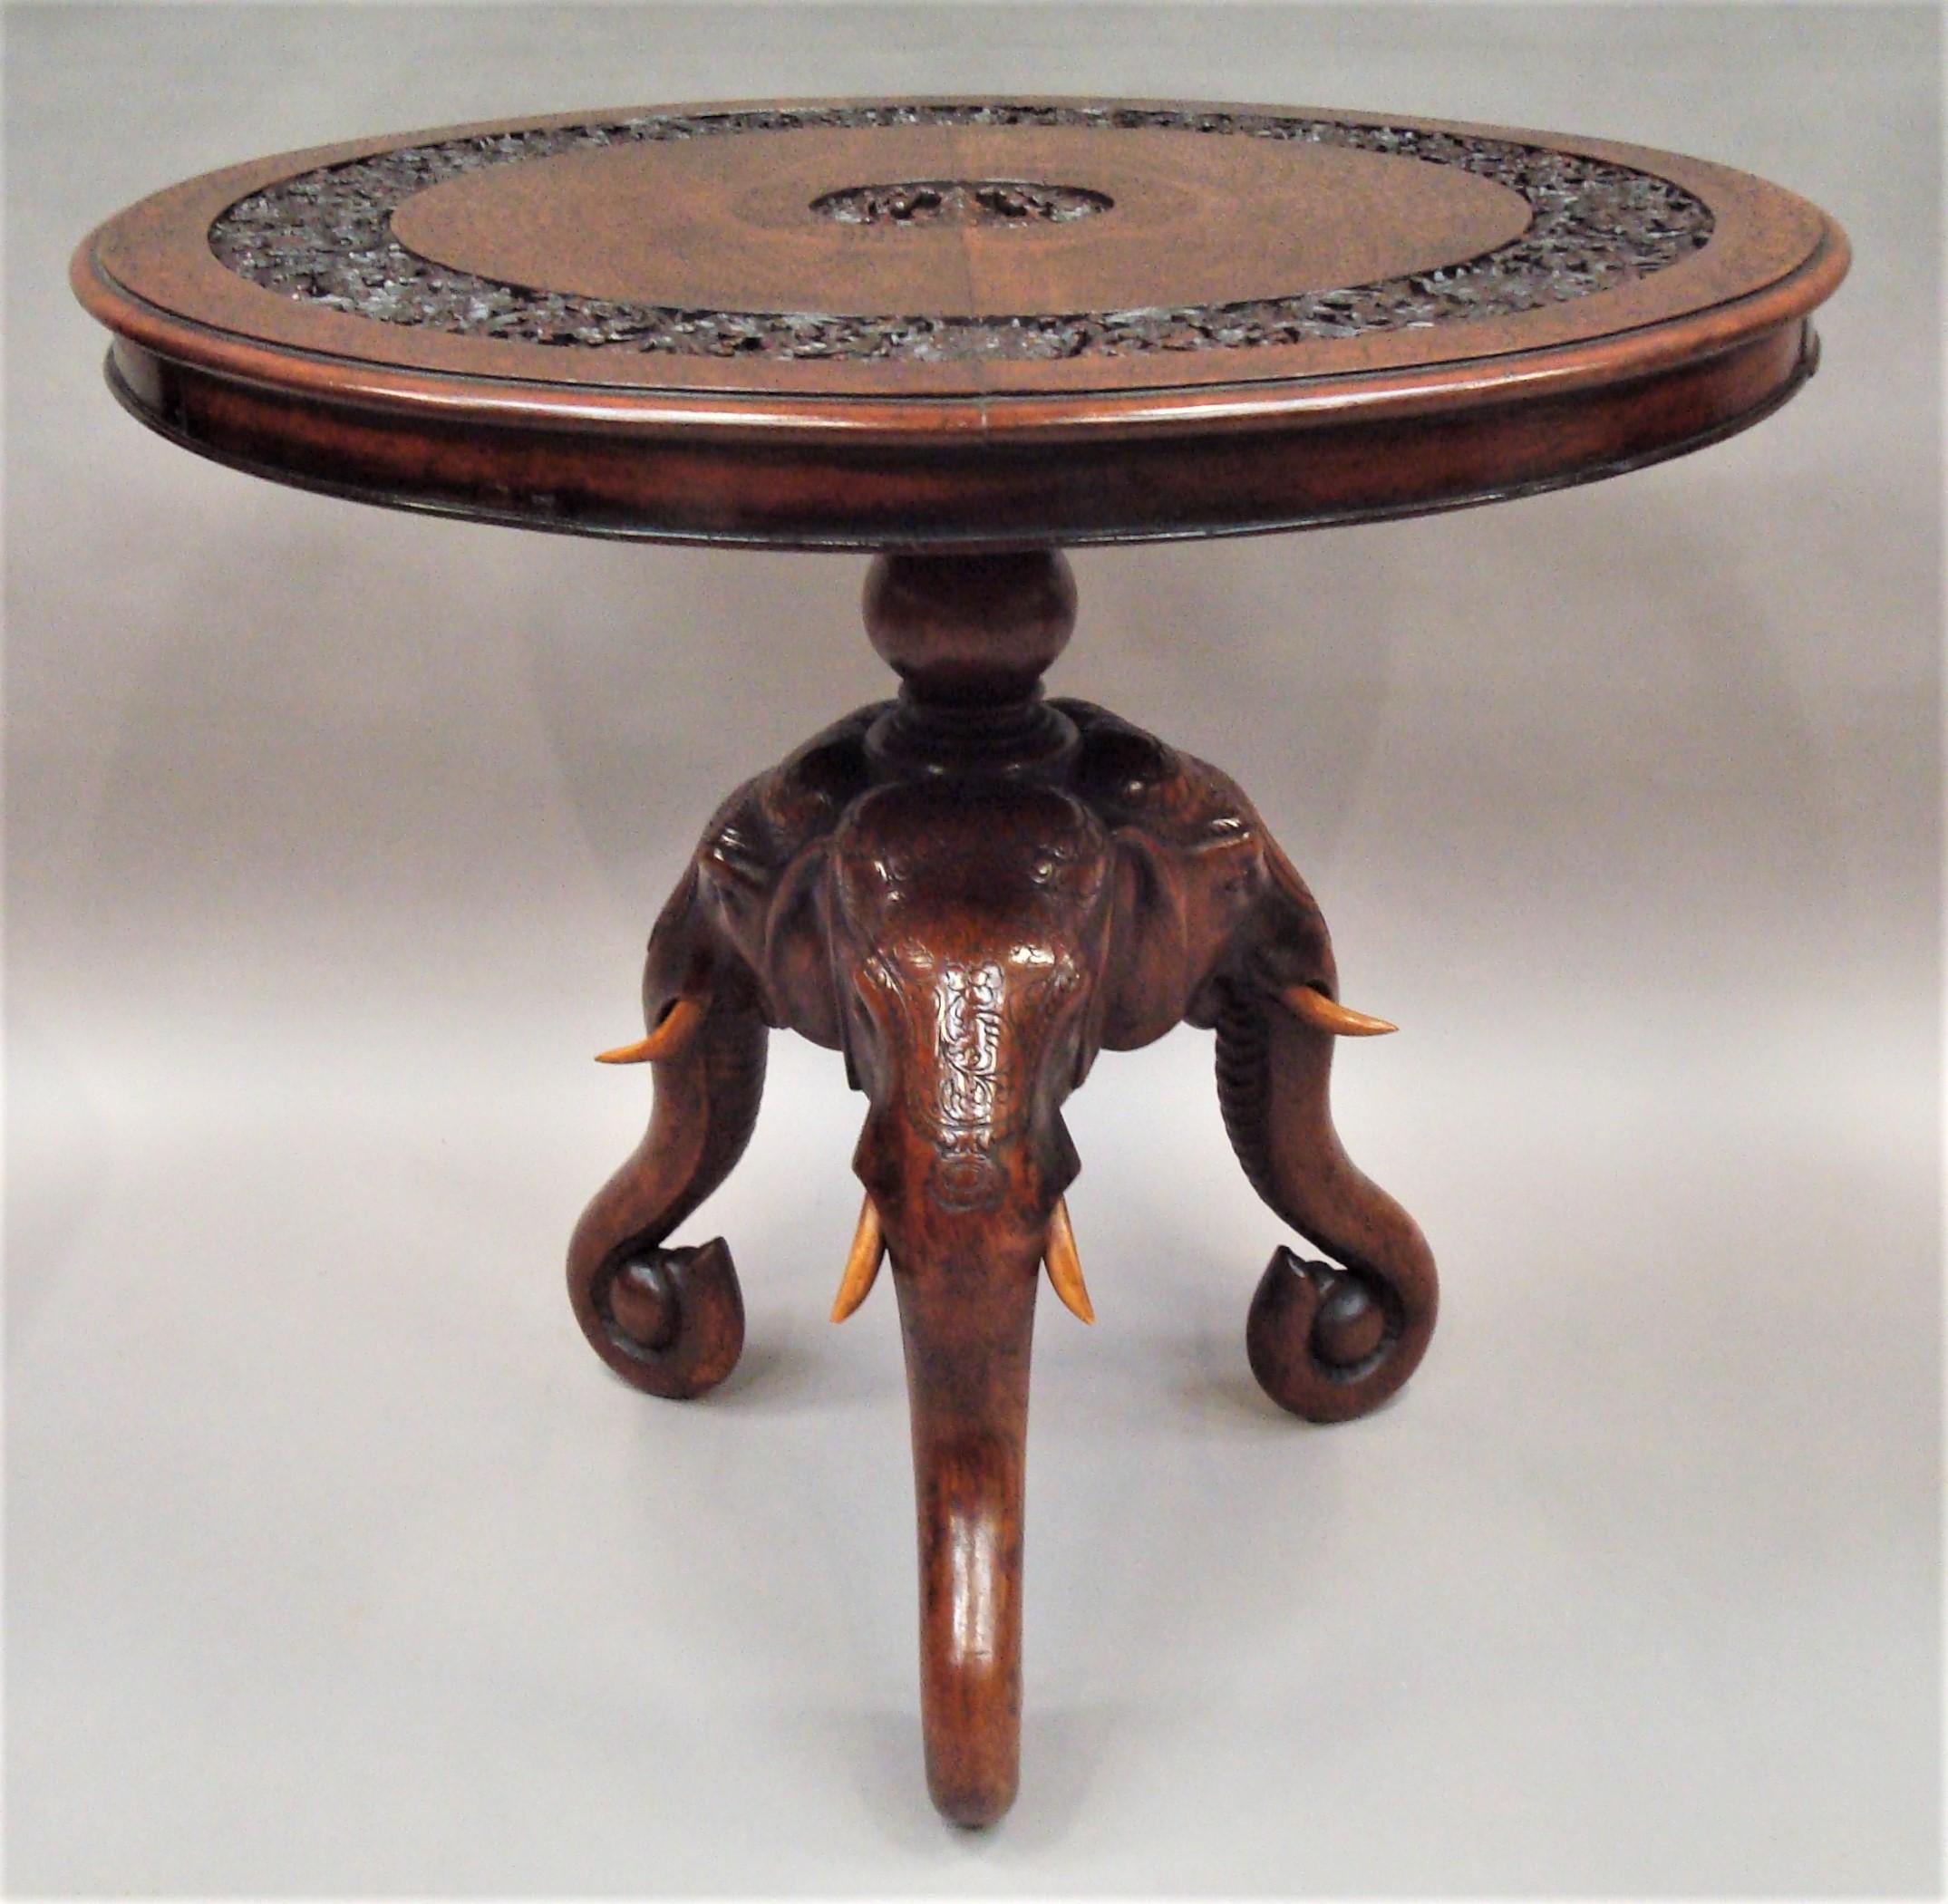 Good 19th century Indian finely carved teak elephant occasional table or centre table of very unusual form; the circular top profusely carved with incised geometric decoration with a carved central panel depicting Lakshmi the Hindu goddess. The